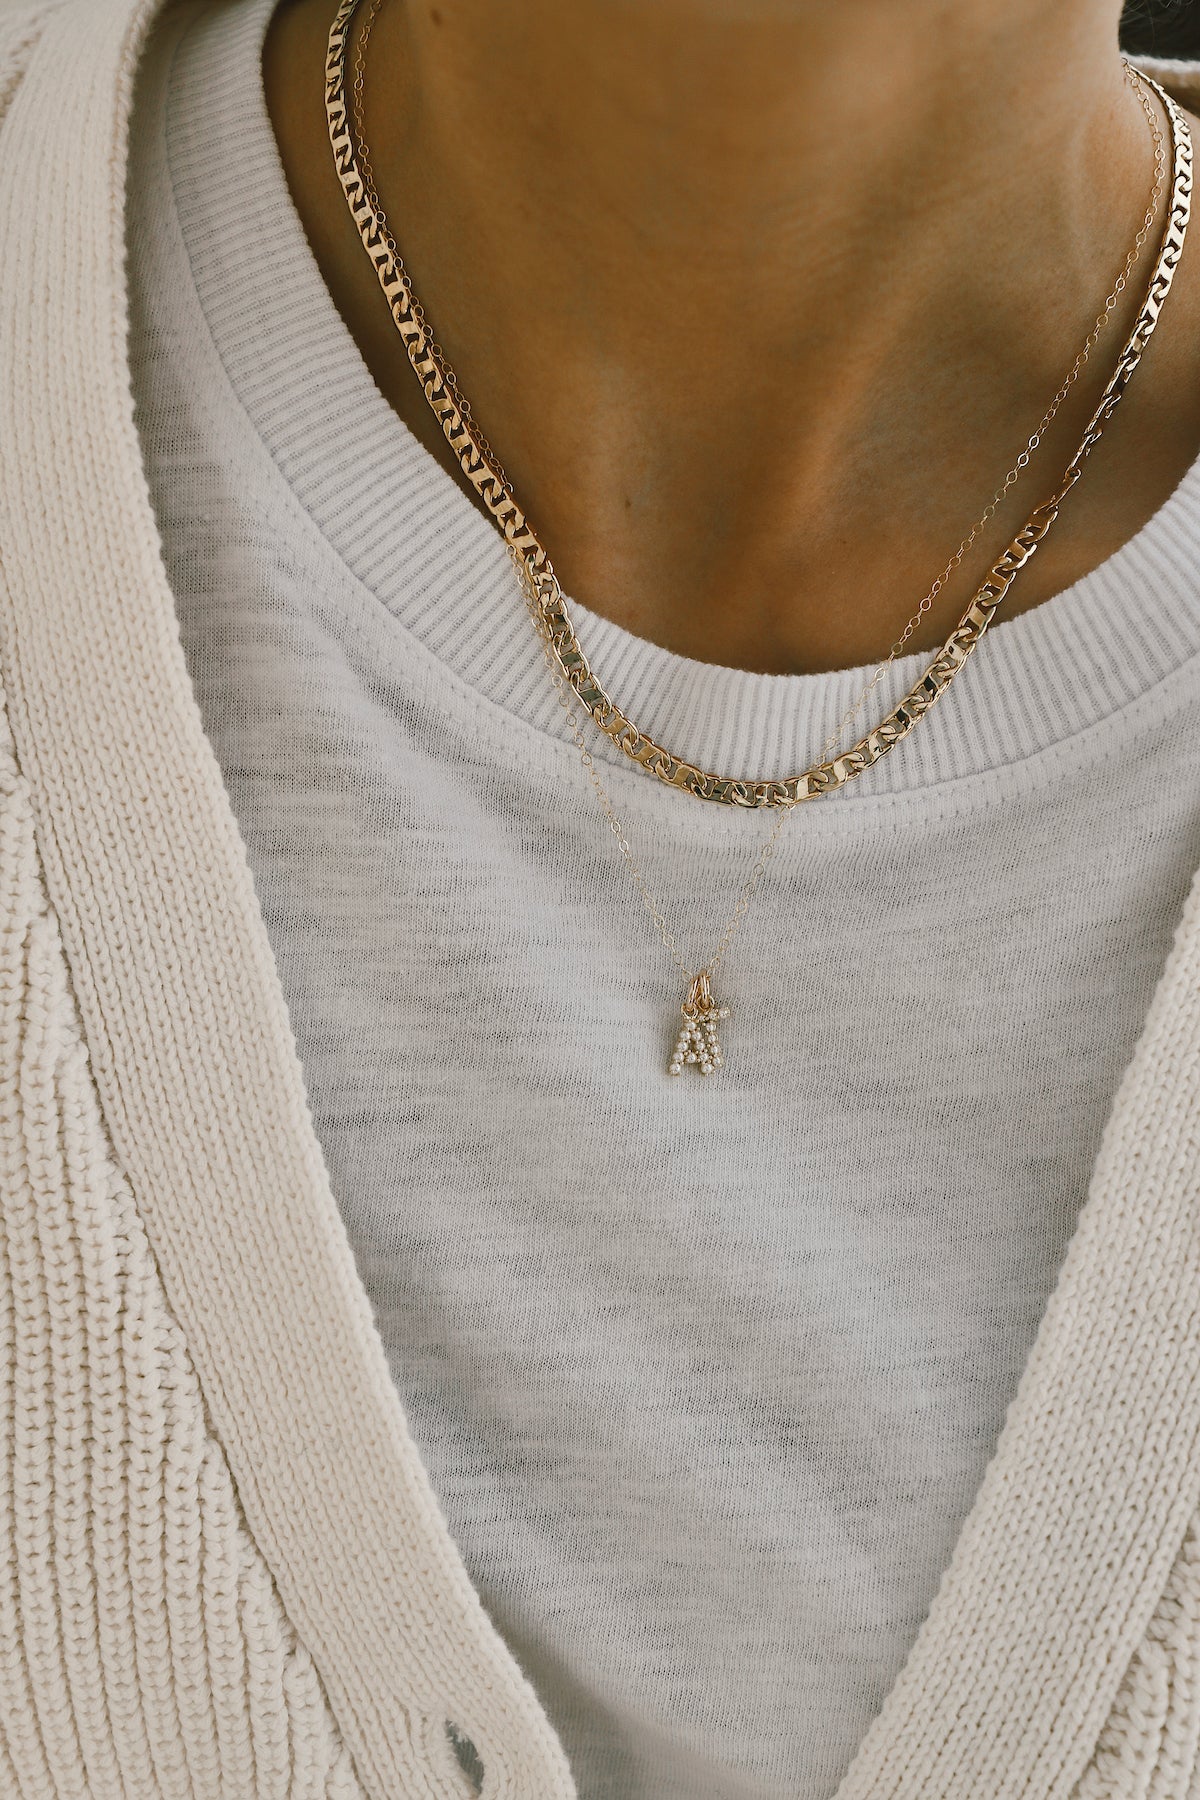 The Vintage Pearl Family Monogram Necklace